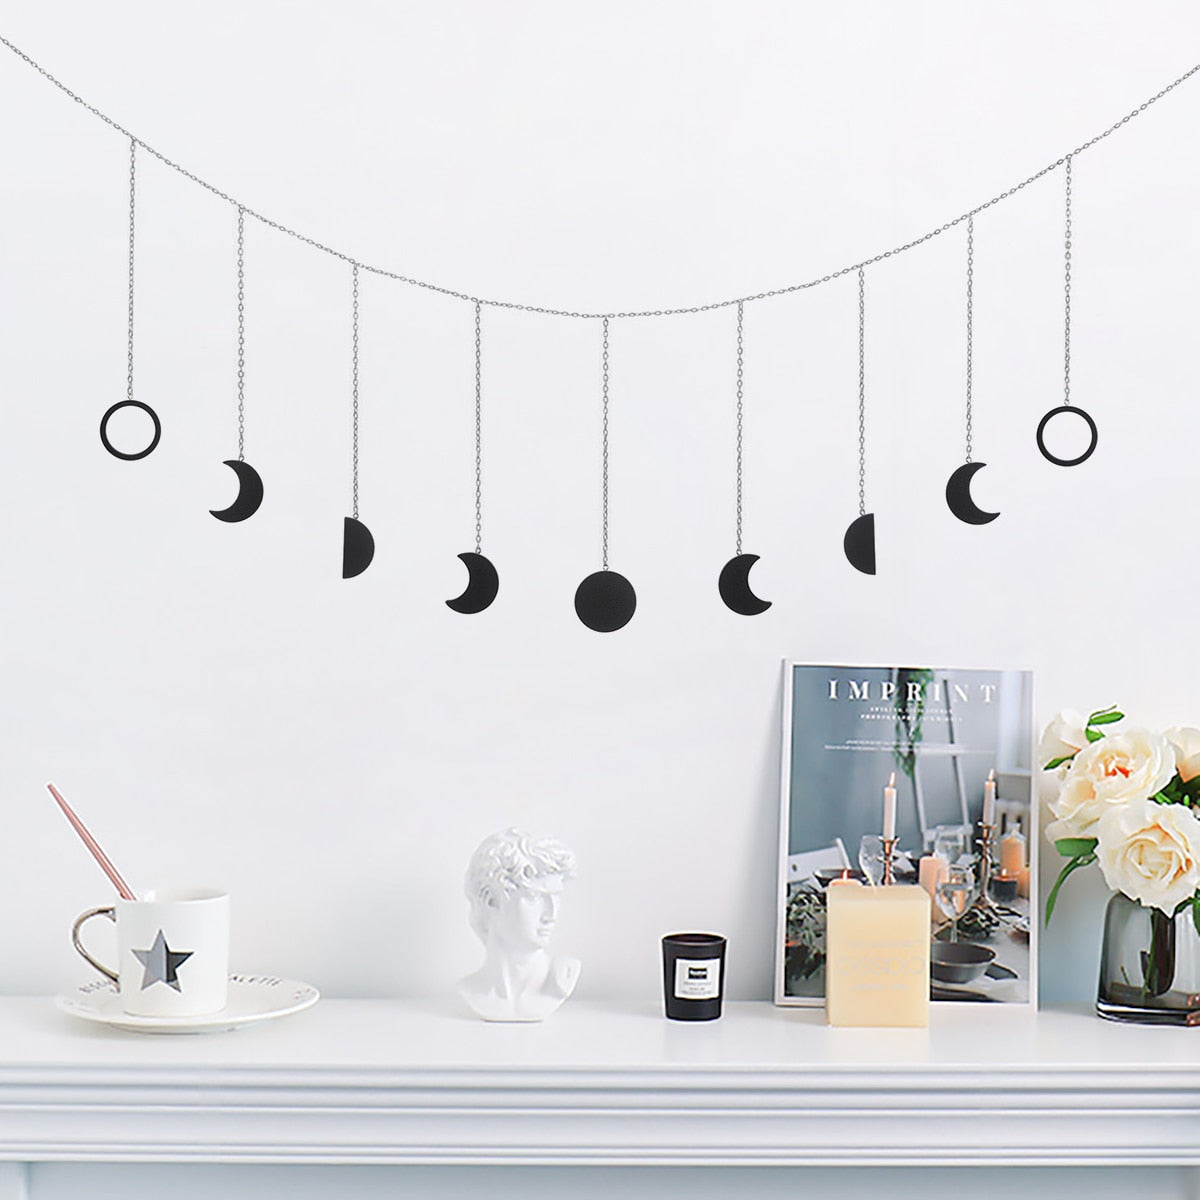 Rags n Rituals Black moon phase garland at $21.99 USD